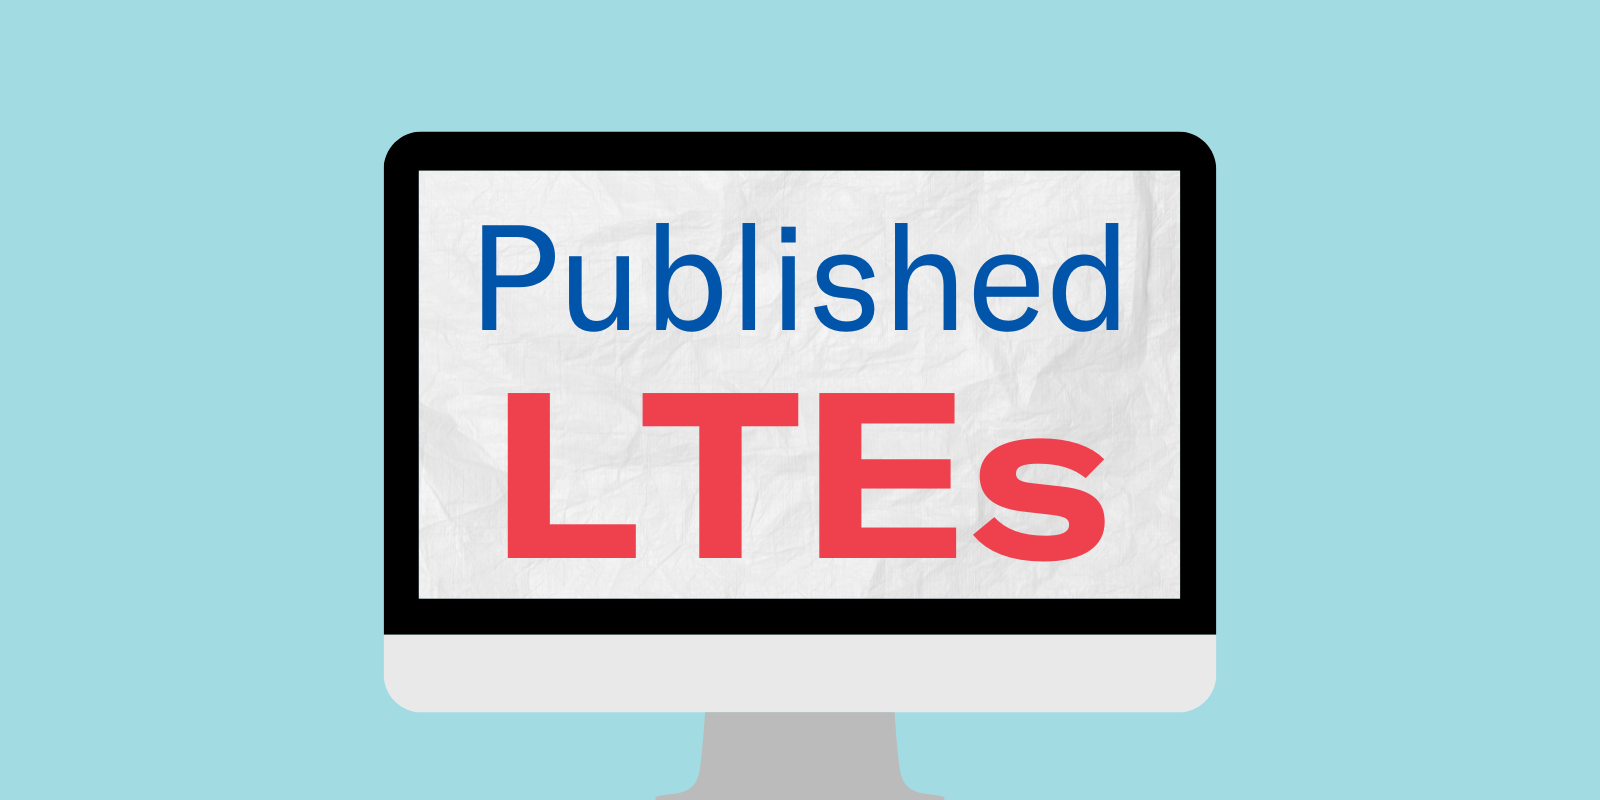 Light blue background, a computer monitor with blue and red text that reads "Published LTEs"